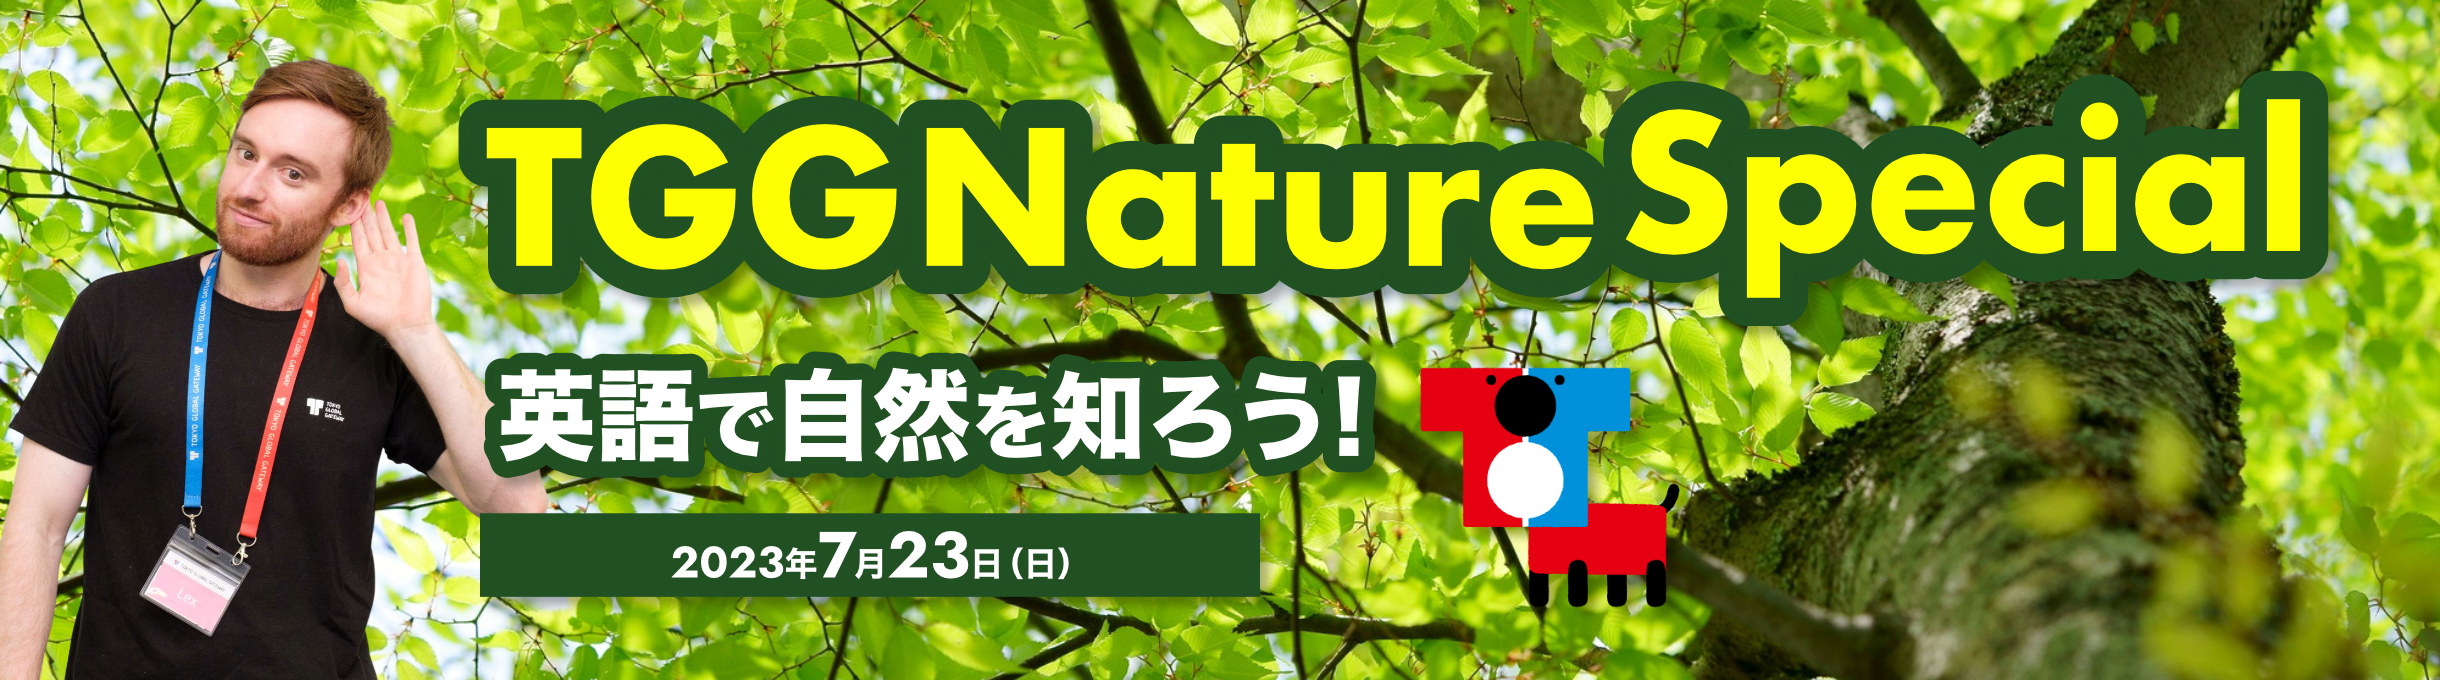 TGG Nature Special　英語で自然を知ろう！　2023年7月23日(日)